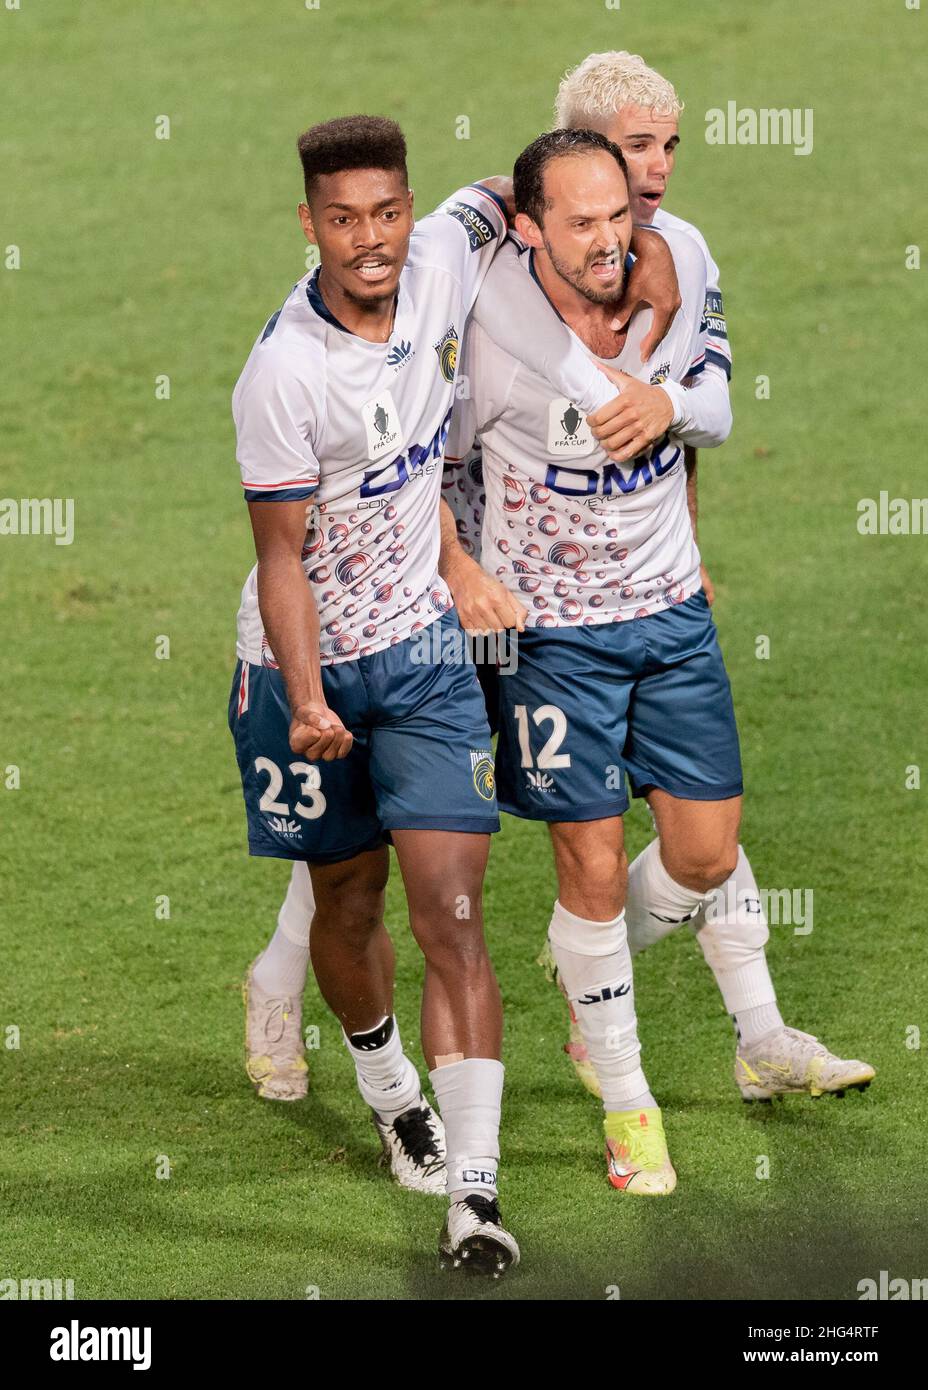 Marcos Urena (12) of the Mariners celebrates with Daniel Hall (23) after scoring a goal during the FFA Cup 2021 Semi Final match between Sydney FC and Central Coast Mariners at Netstrata Jubilee Stadium on January 18, 2022, in Sydney, Australia. (Editorial use only) Stock Photo